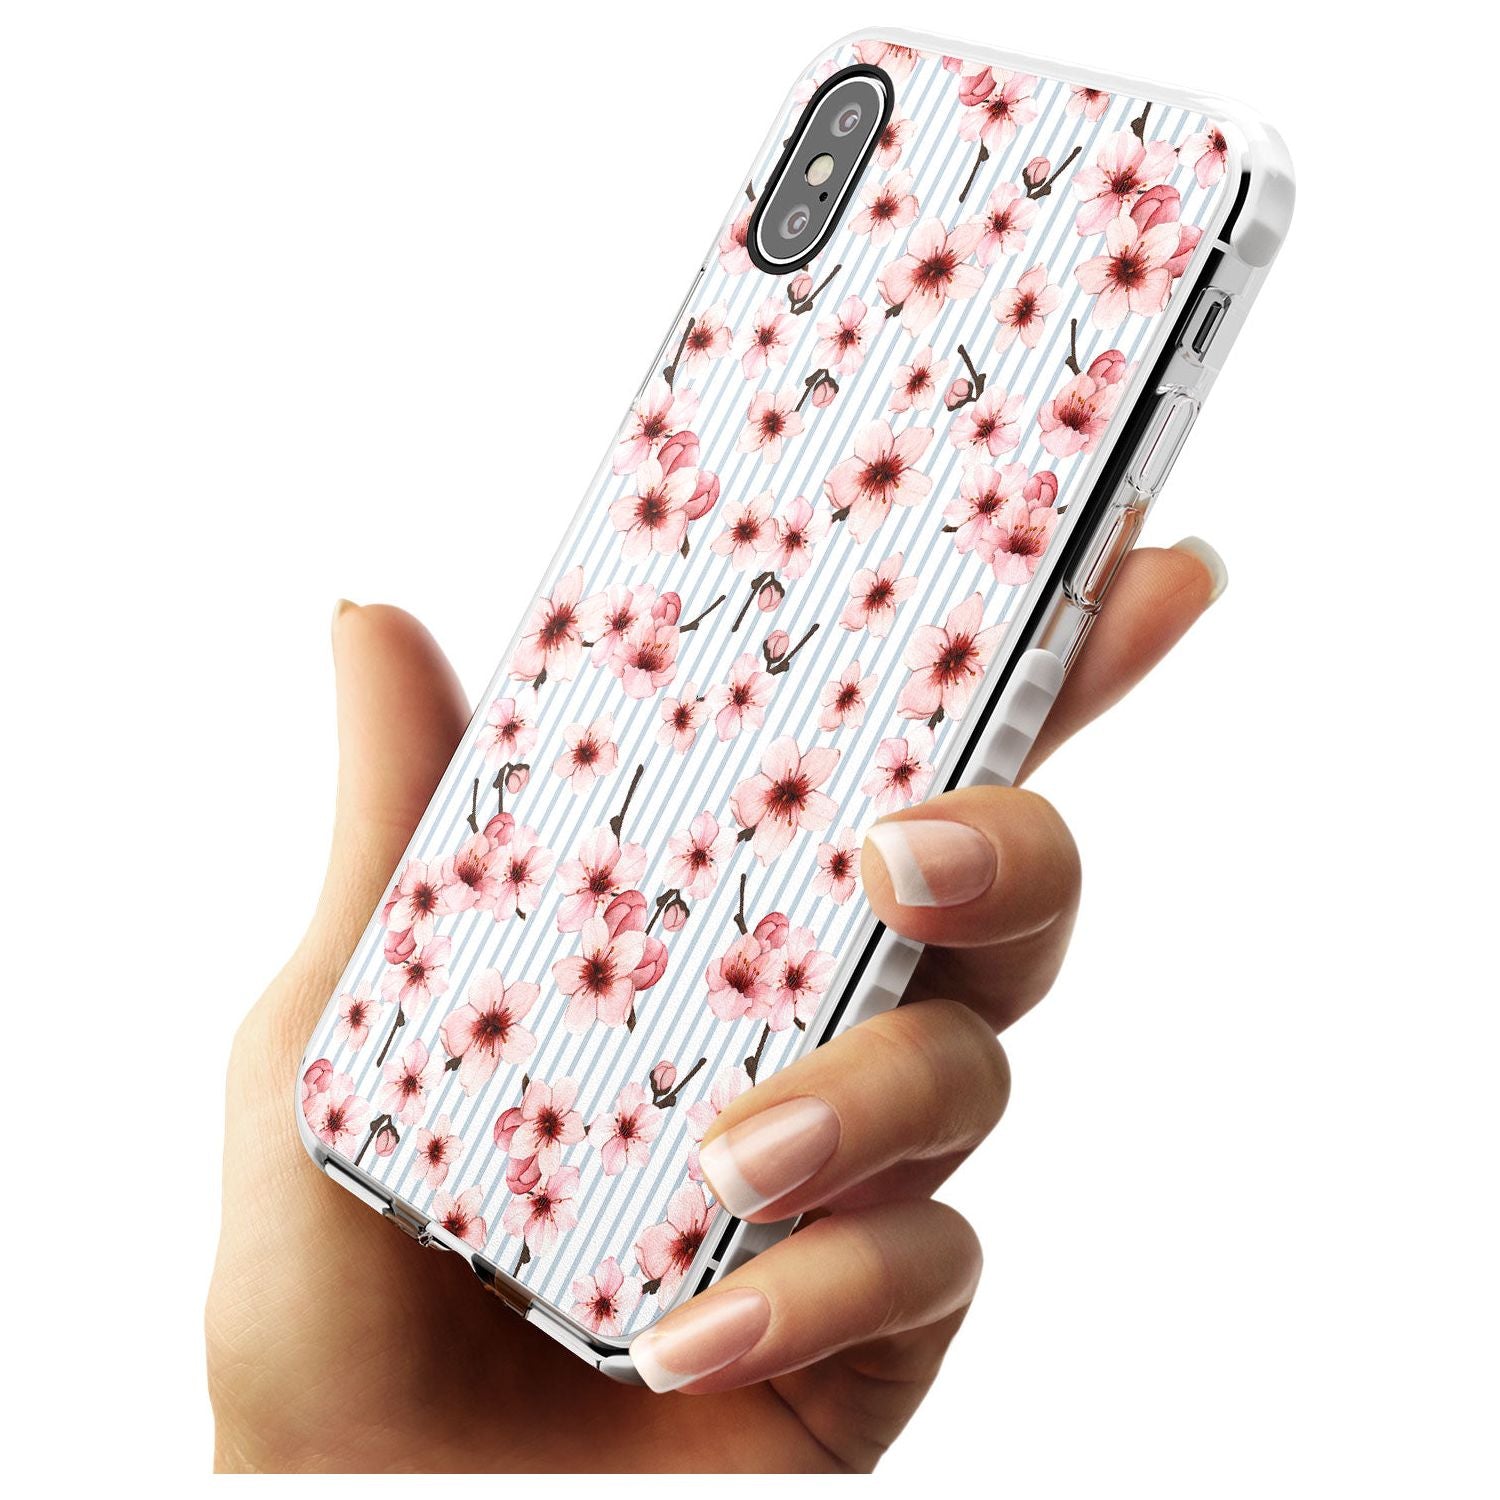 Cherry Blossoms on Blue Stripes Pattern Impact Phone Case for iPhone X XS Max XR